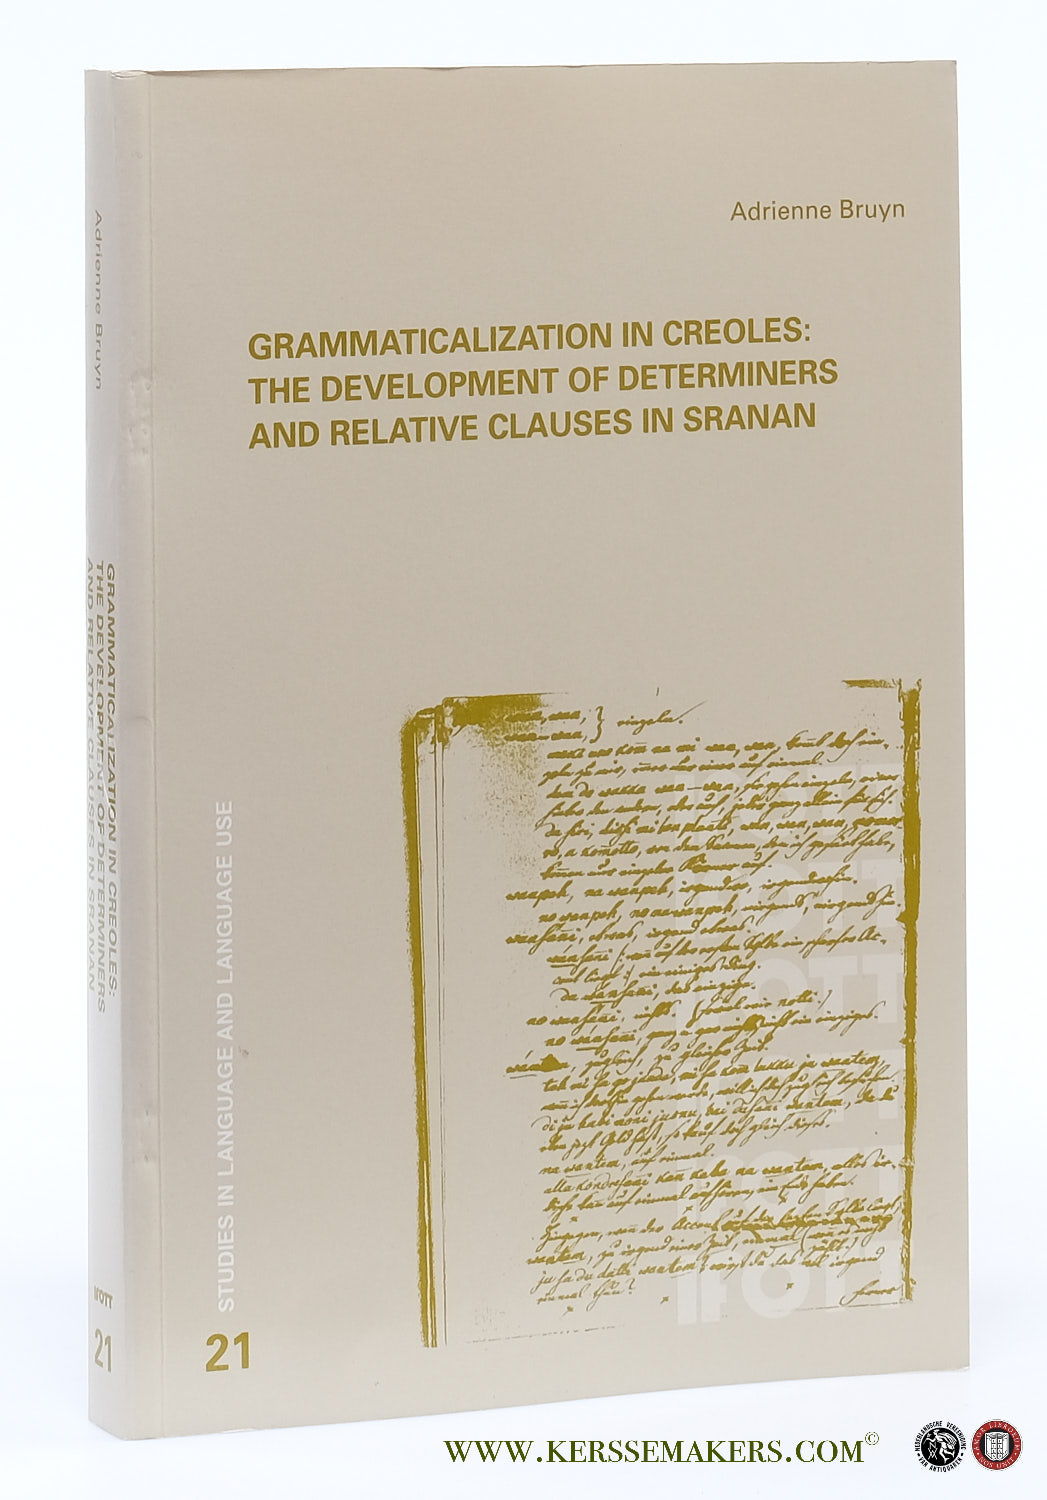 Grammaticalization in Creoles : The Development of Determiners and Relative Clauses in Sranan. - Bruyn, Adrienne.